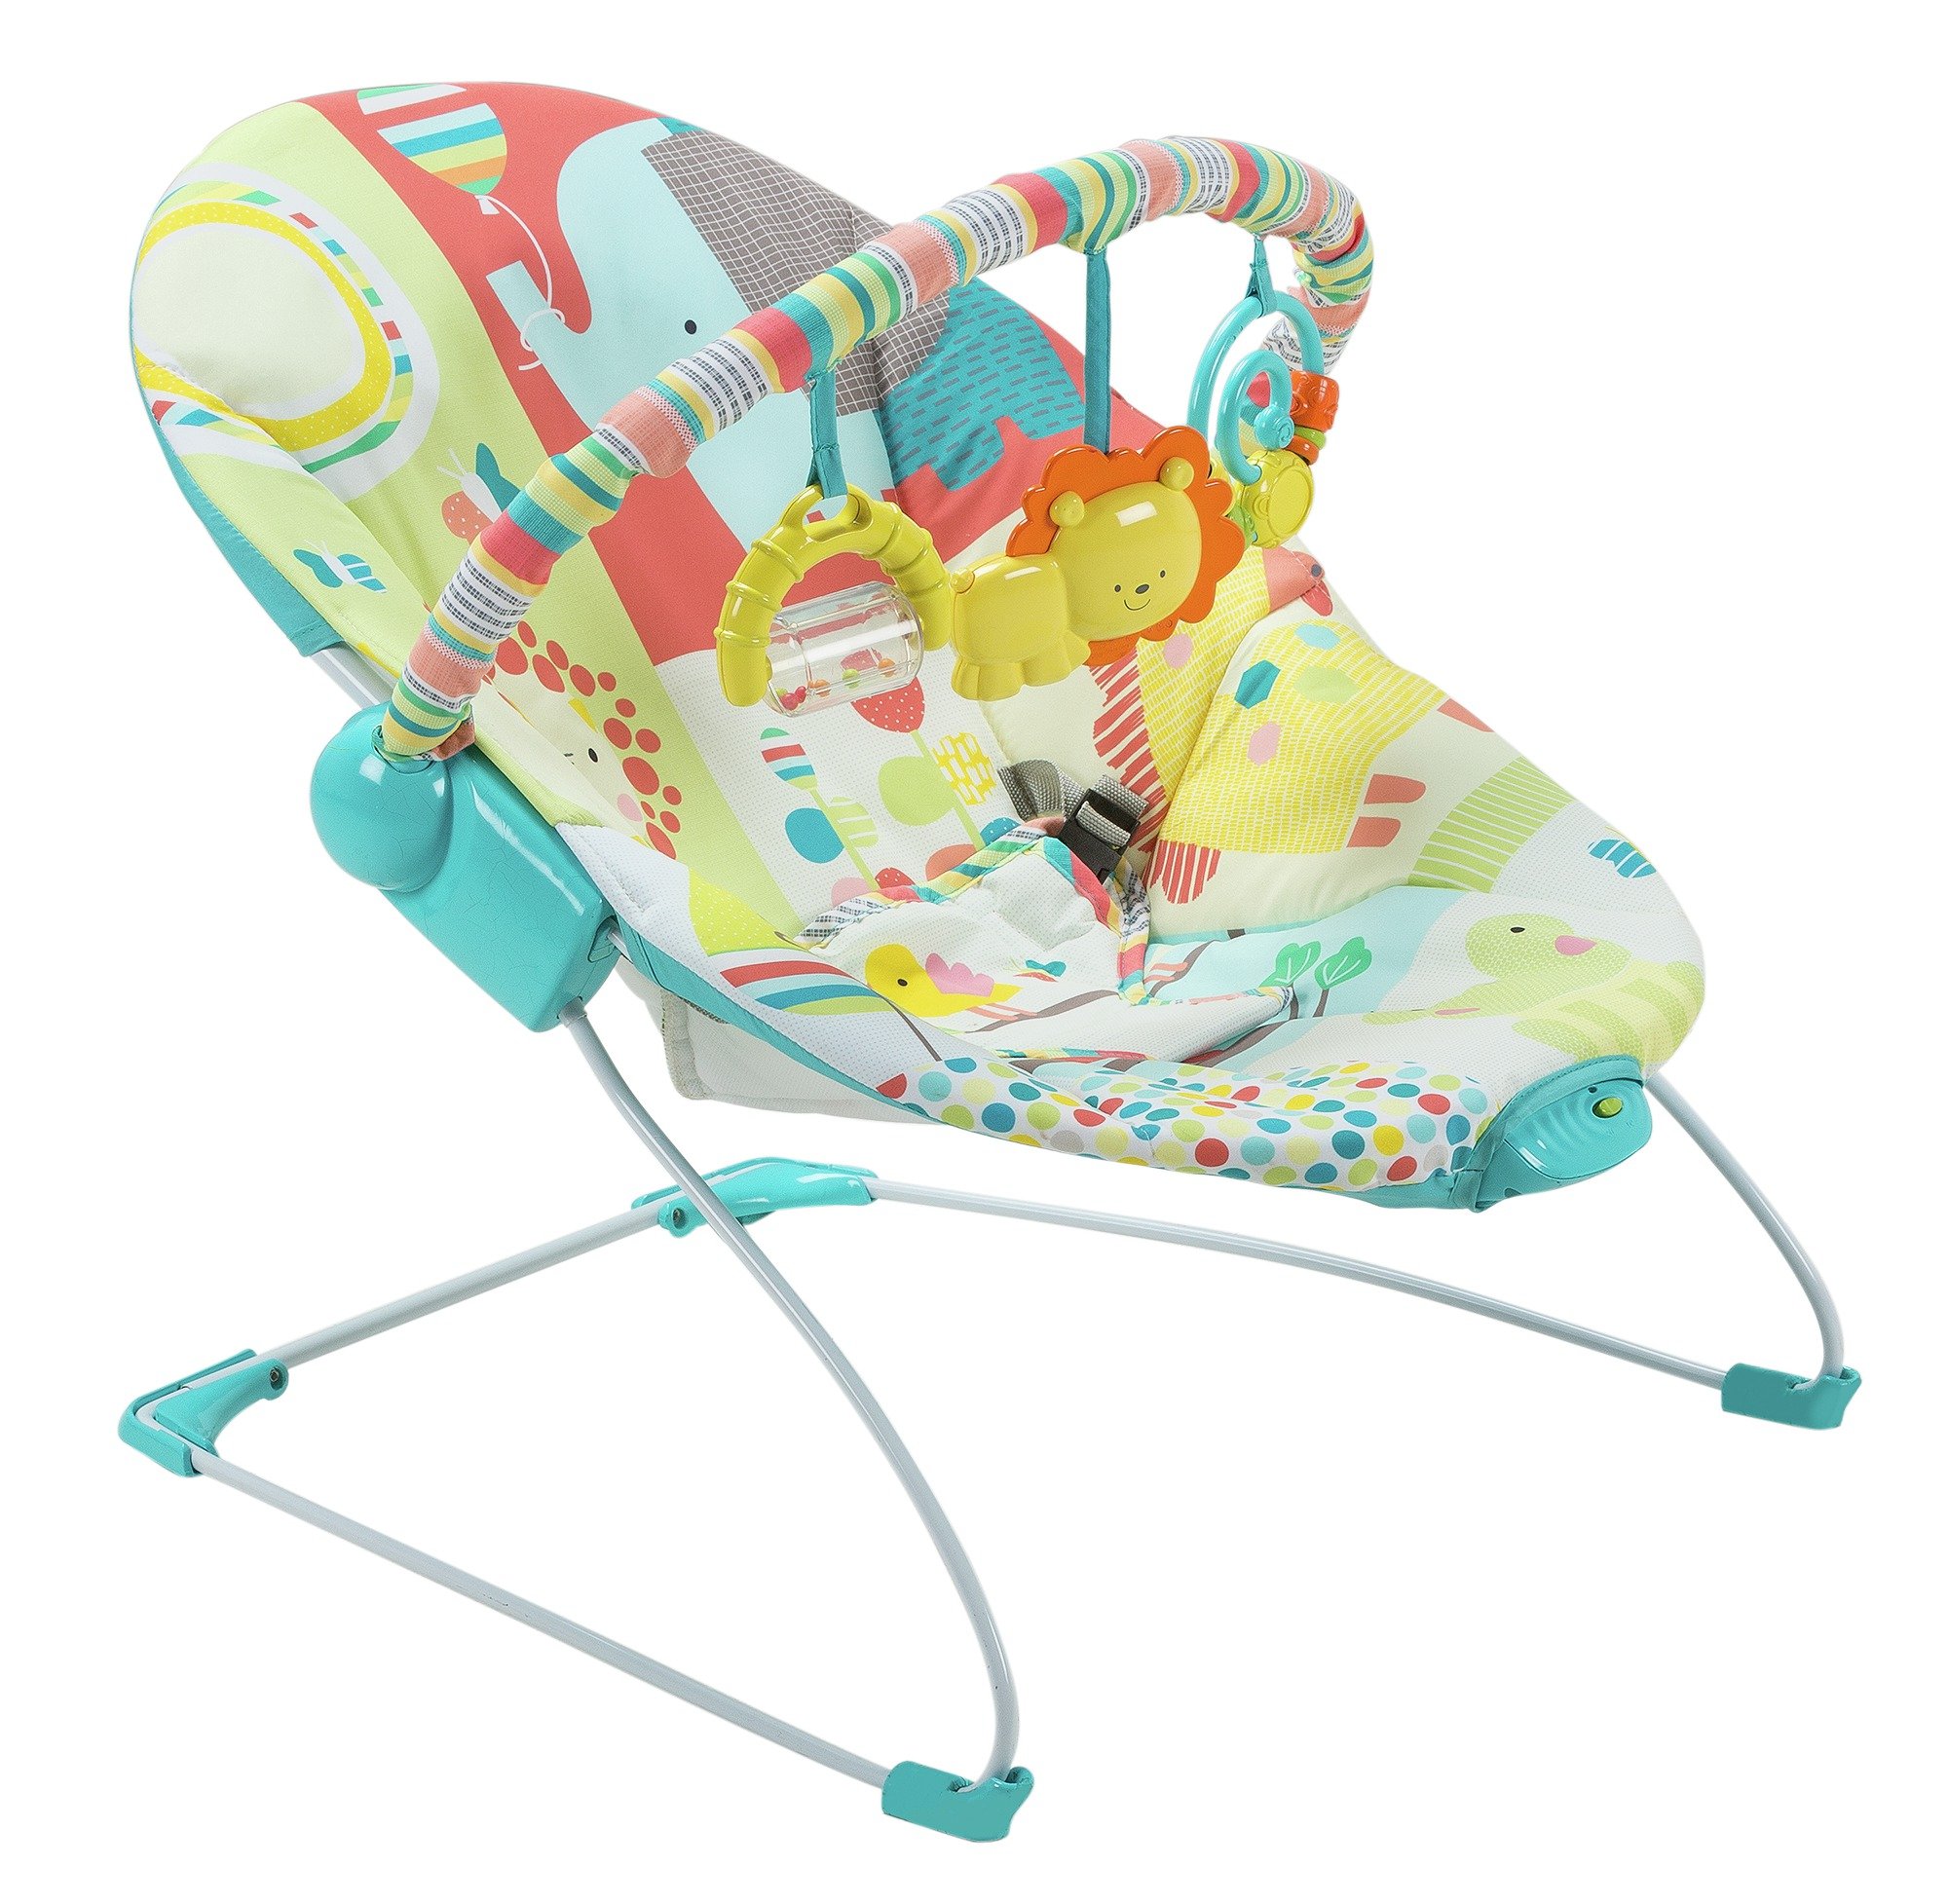 Chad Valley Circus Friends Deluxe Bouncer